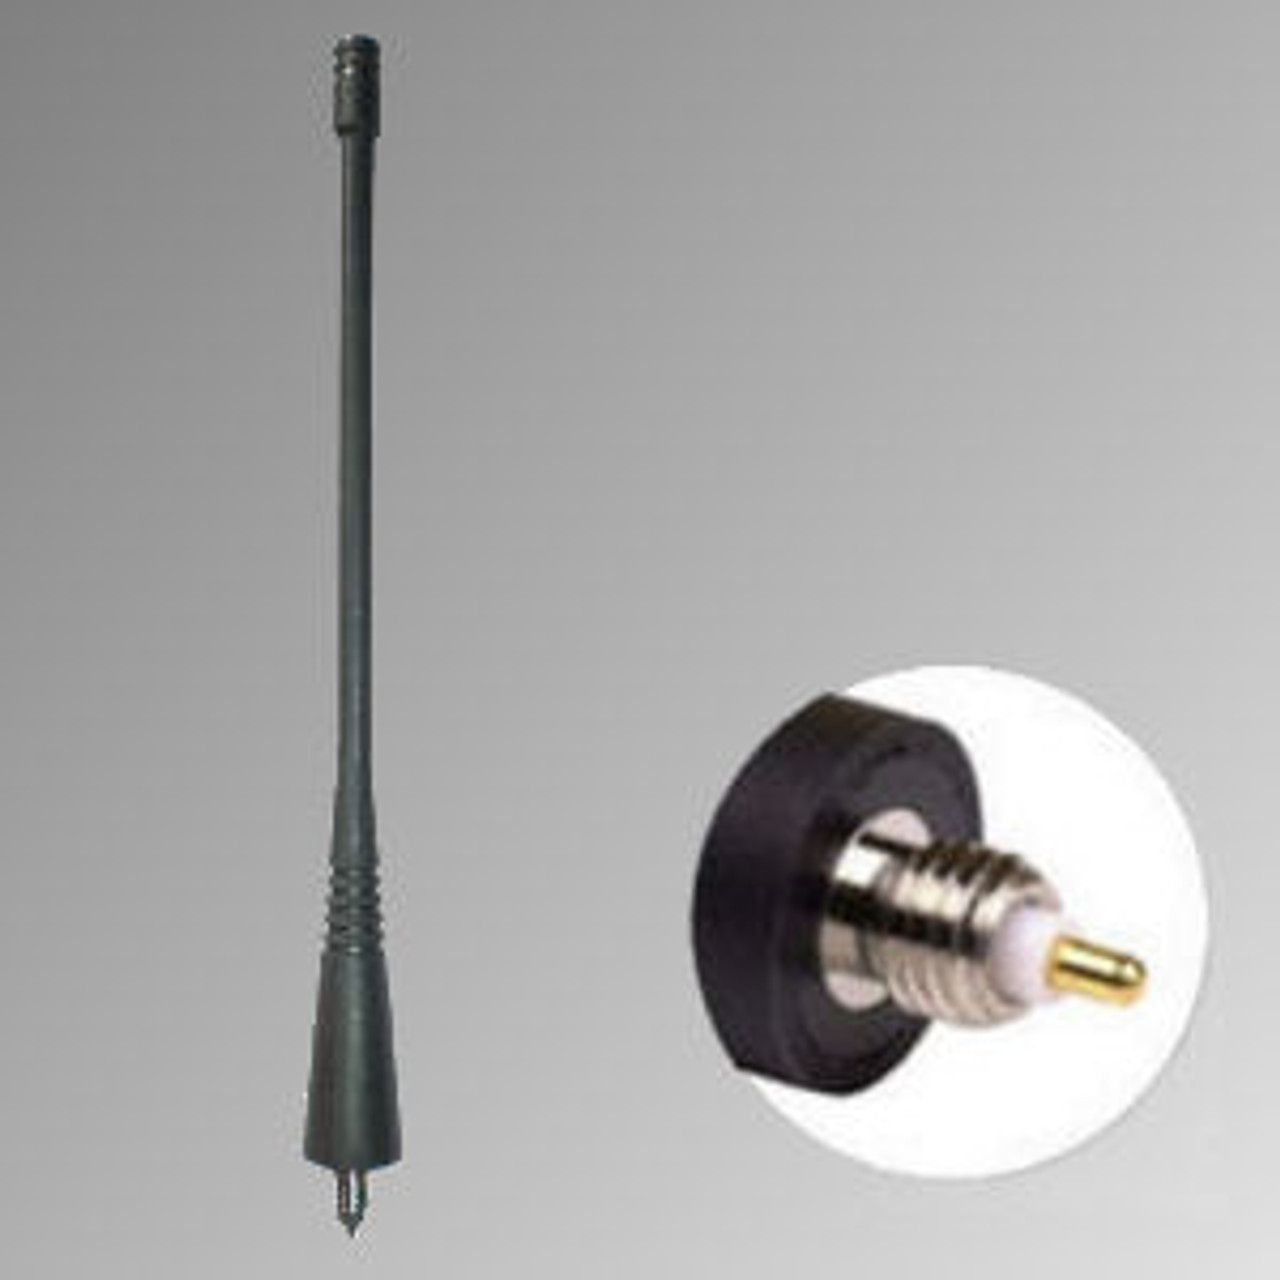 M/A-Com LPE-200 1/2 Wave Extended Range Antenna - 5.7", Dual-Band, 698-870 MHz